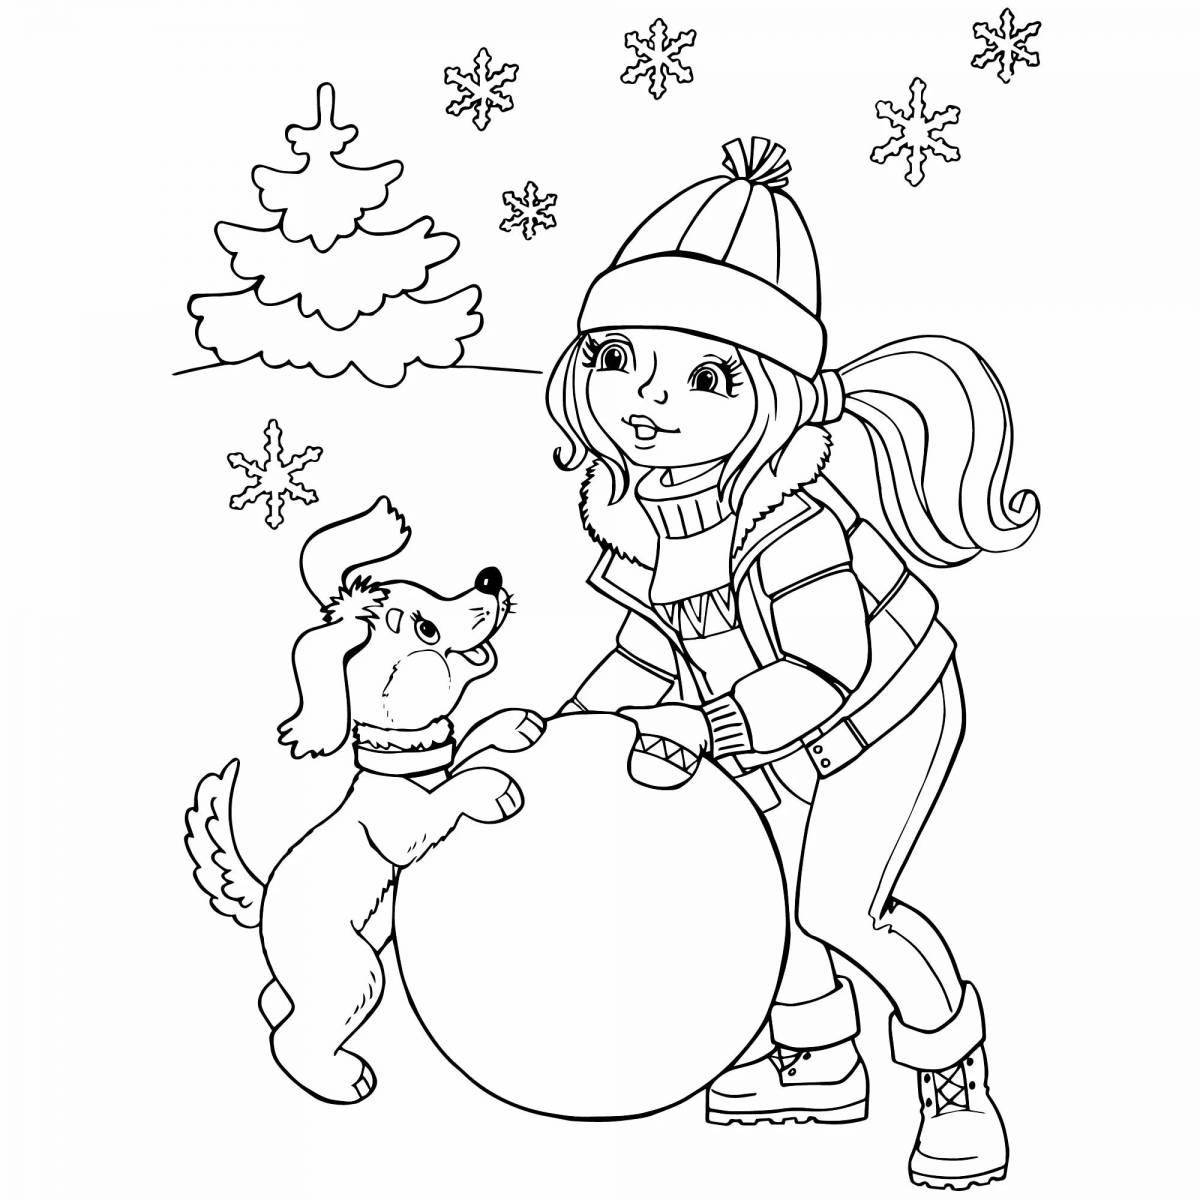 Charming coloring book for children 6 years old winter